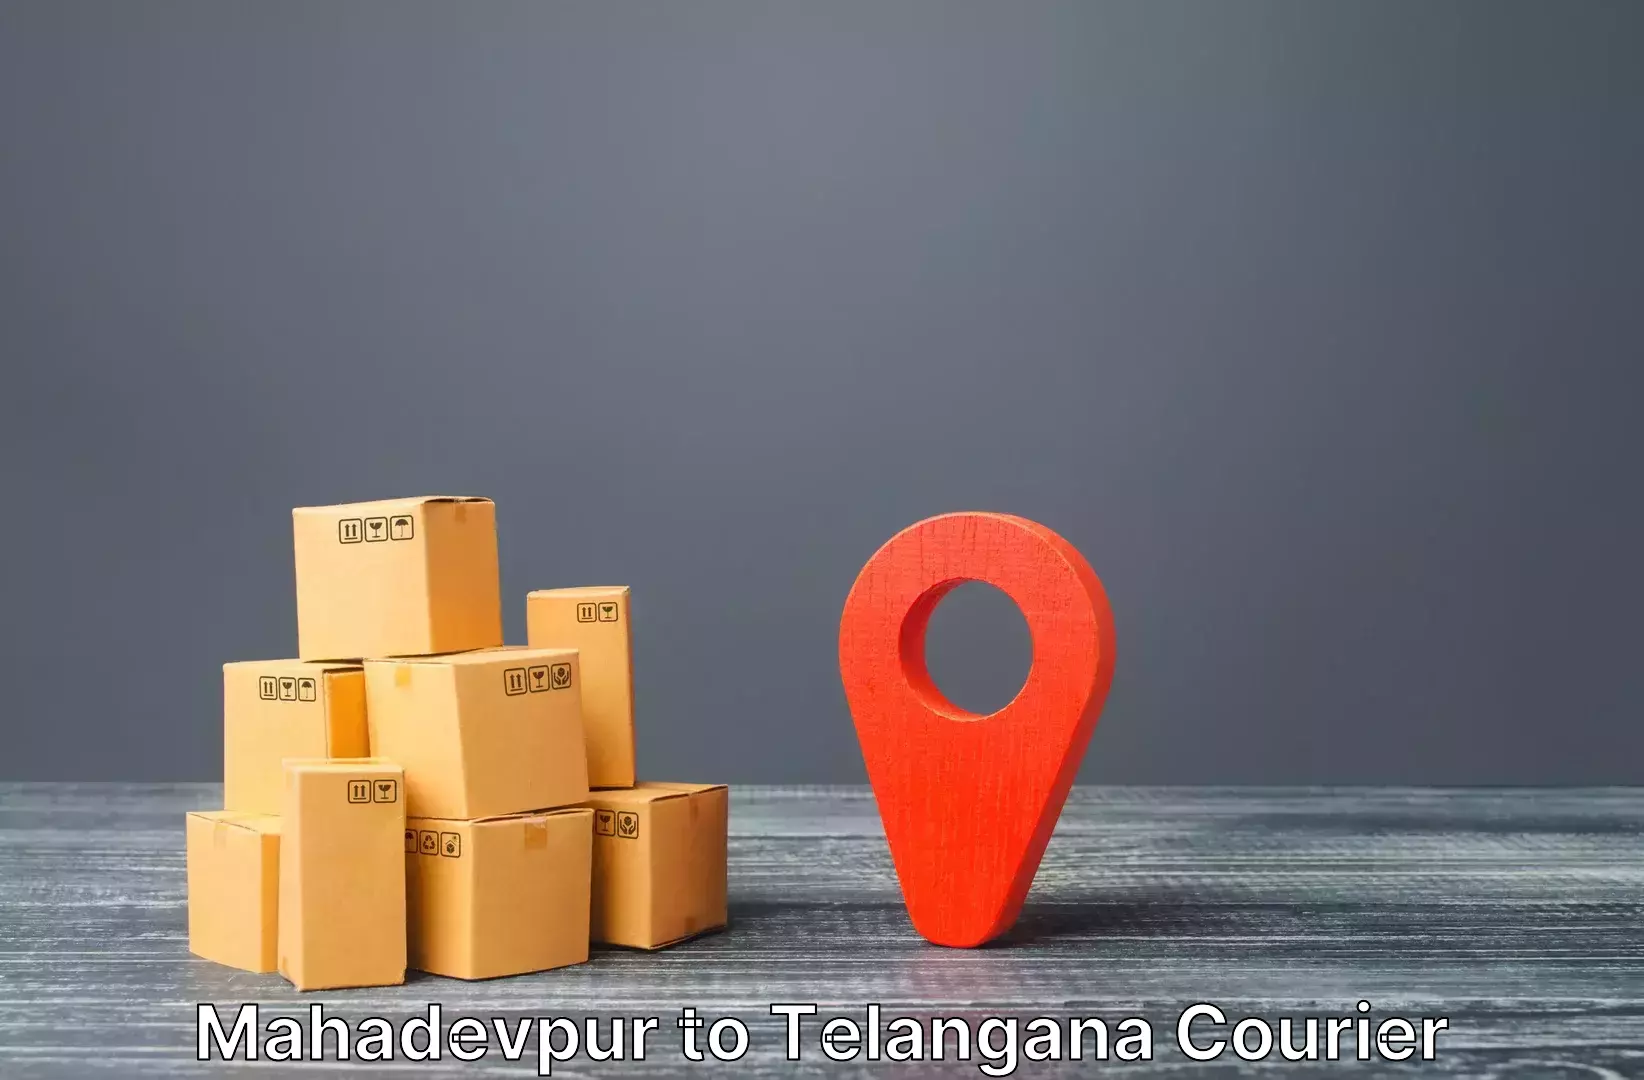 Baggage shipping service Mahadevpur to Manneguda